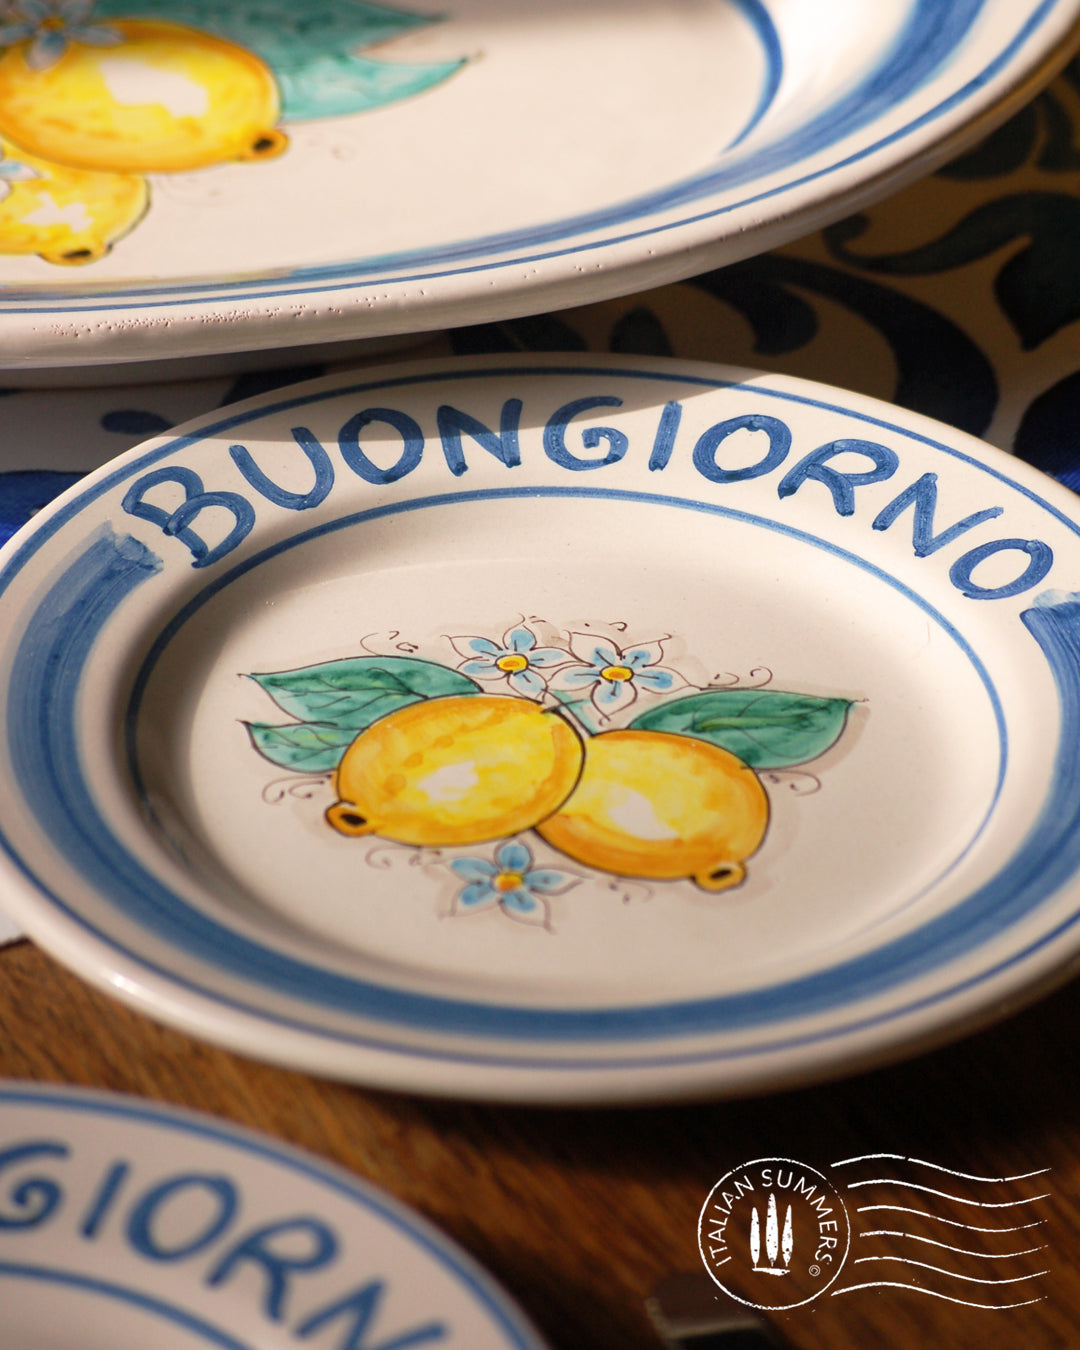 Ceramic plate Buongiorno Limoni handpainted in Sicily. This plate has the quote Biongiorno on the rim - handpainted - And colorfull lemons on the center of the plate with lemon flowers. On the rim of the plate there are blue paint stripes. The blue color is ultra marine. This plate is designed and sold by Italian Summers.